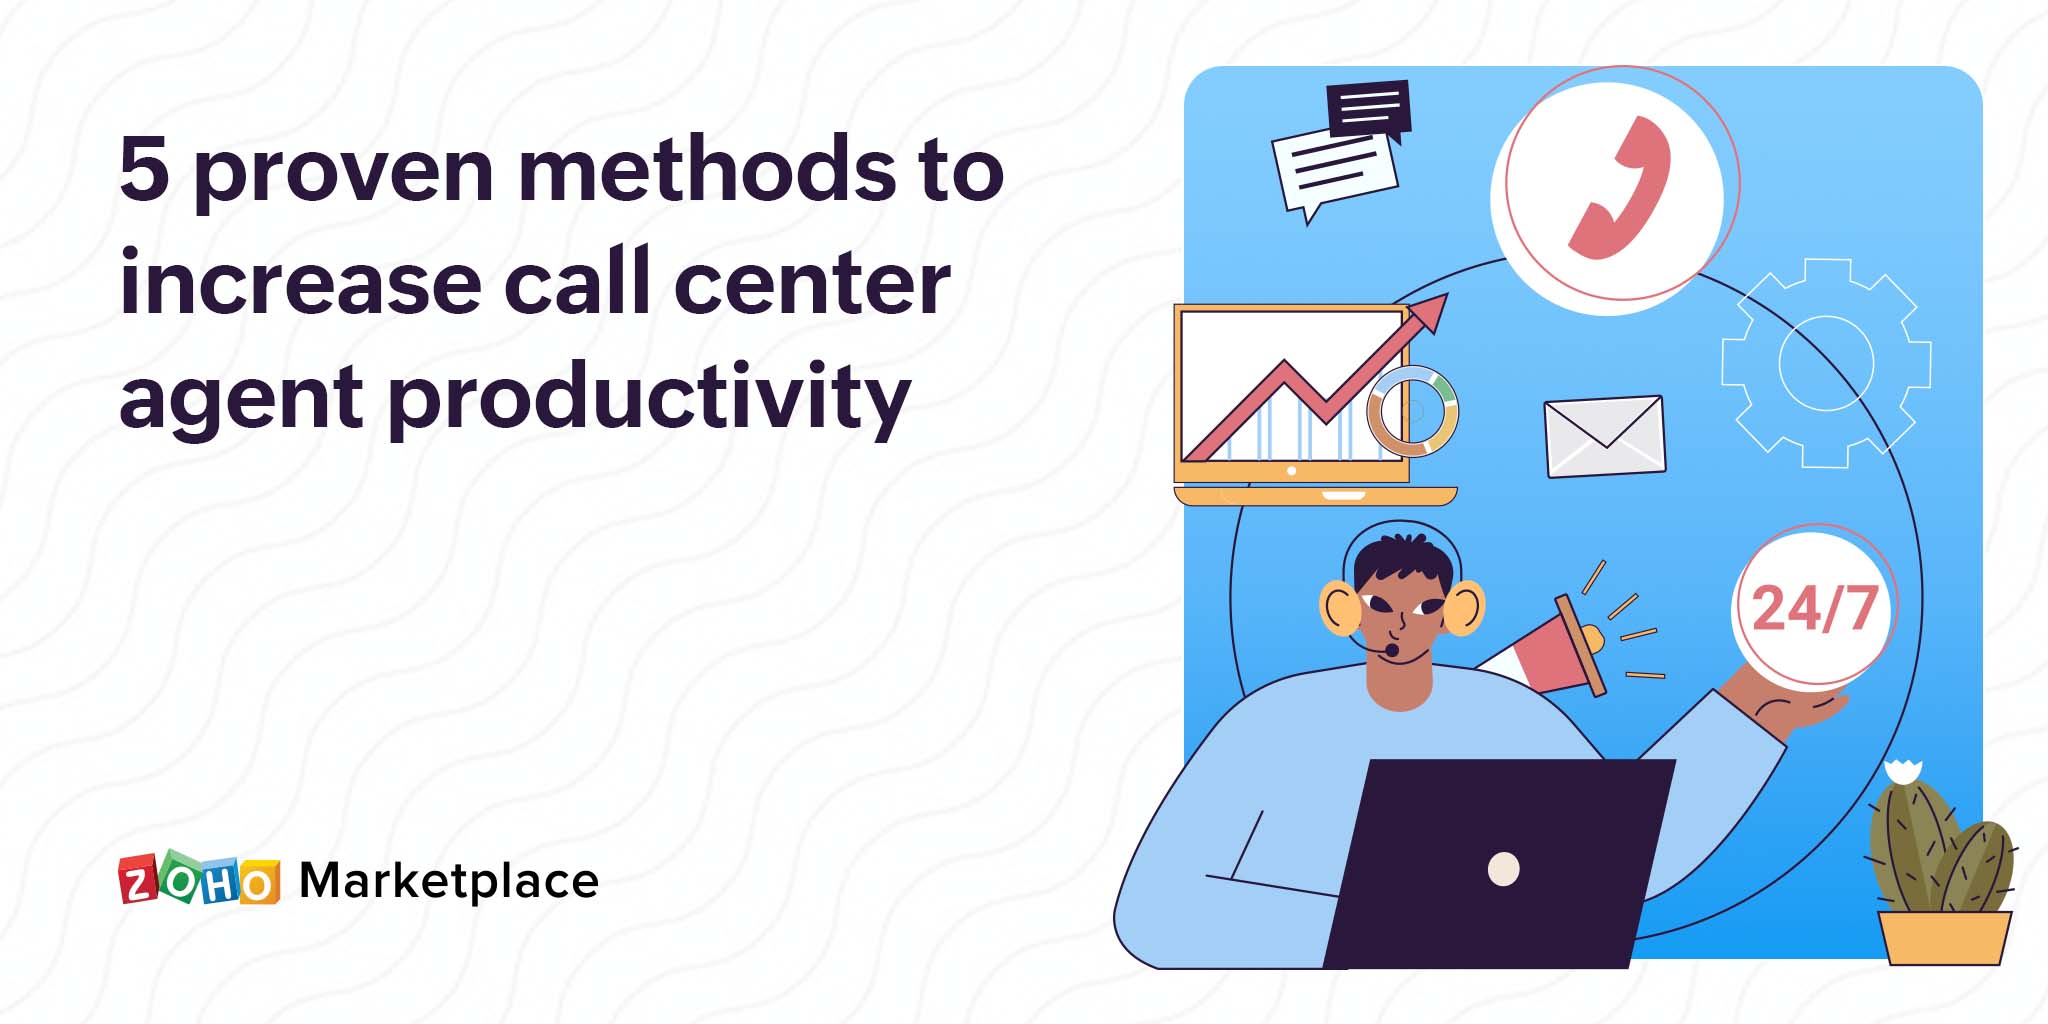 ProTips: 5 proven methods to increase call center agent productivity